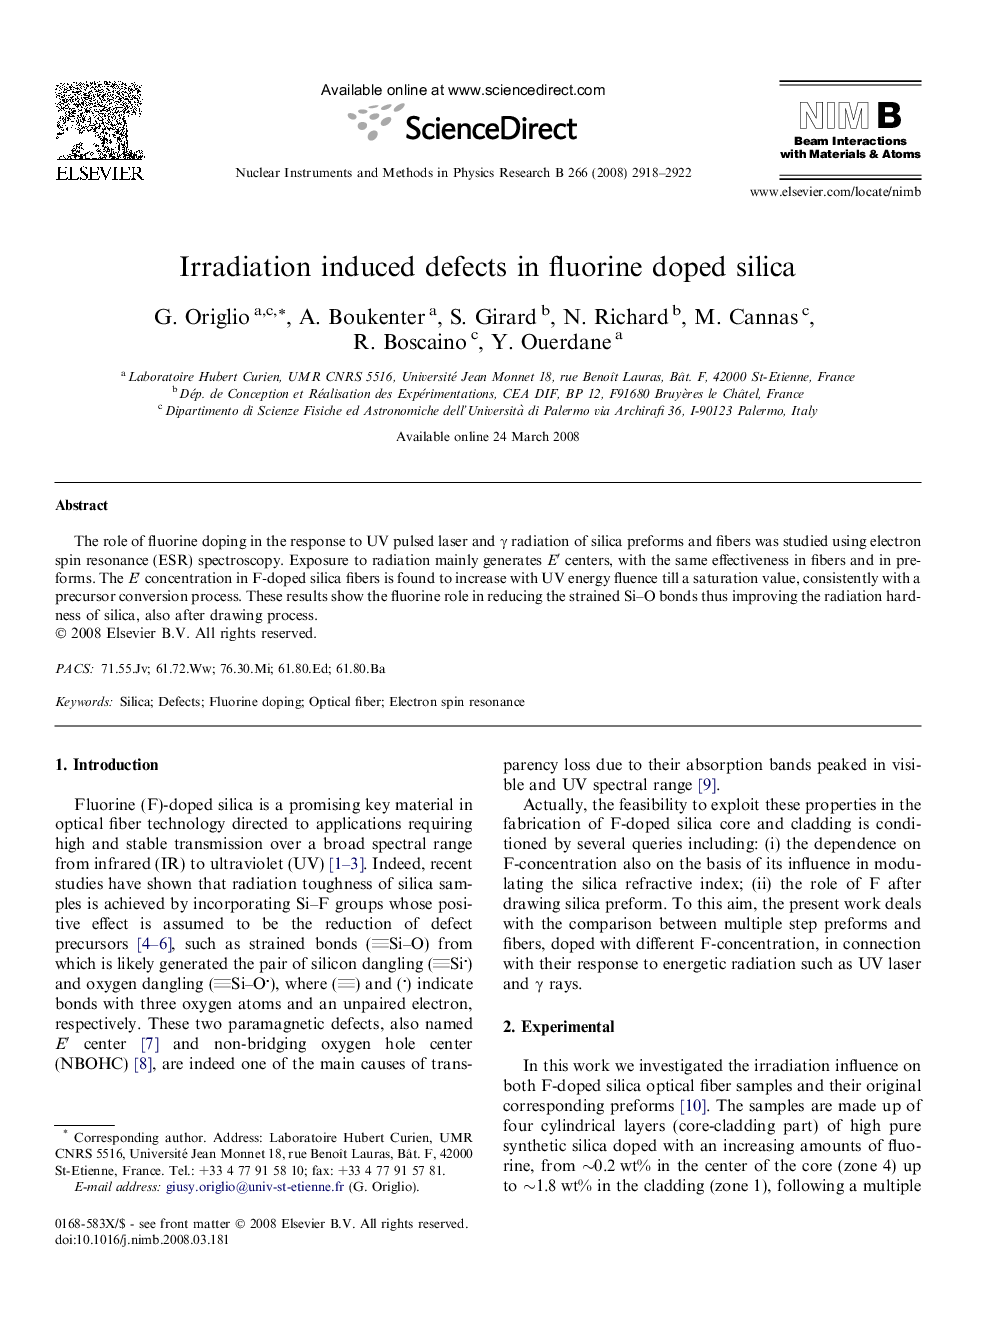 Irradiation induced defects in fluorine doped silica